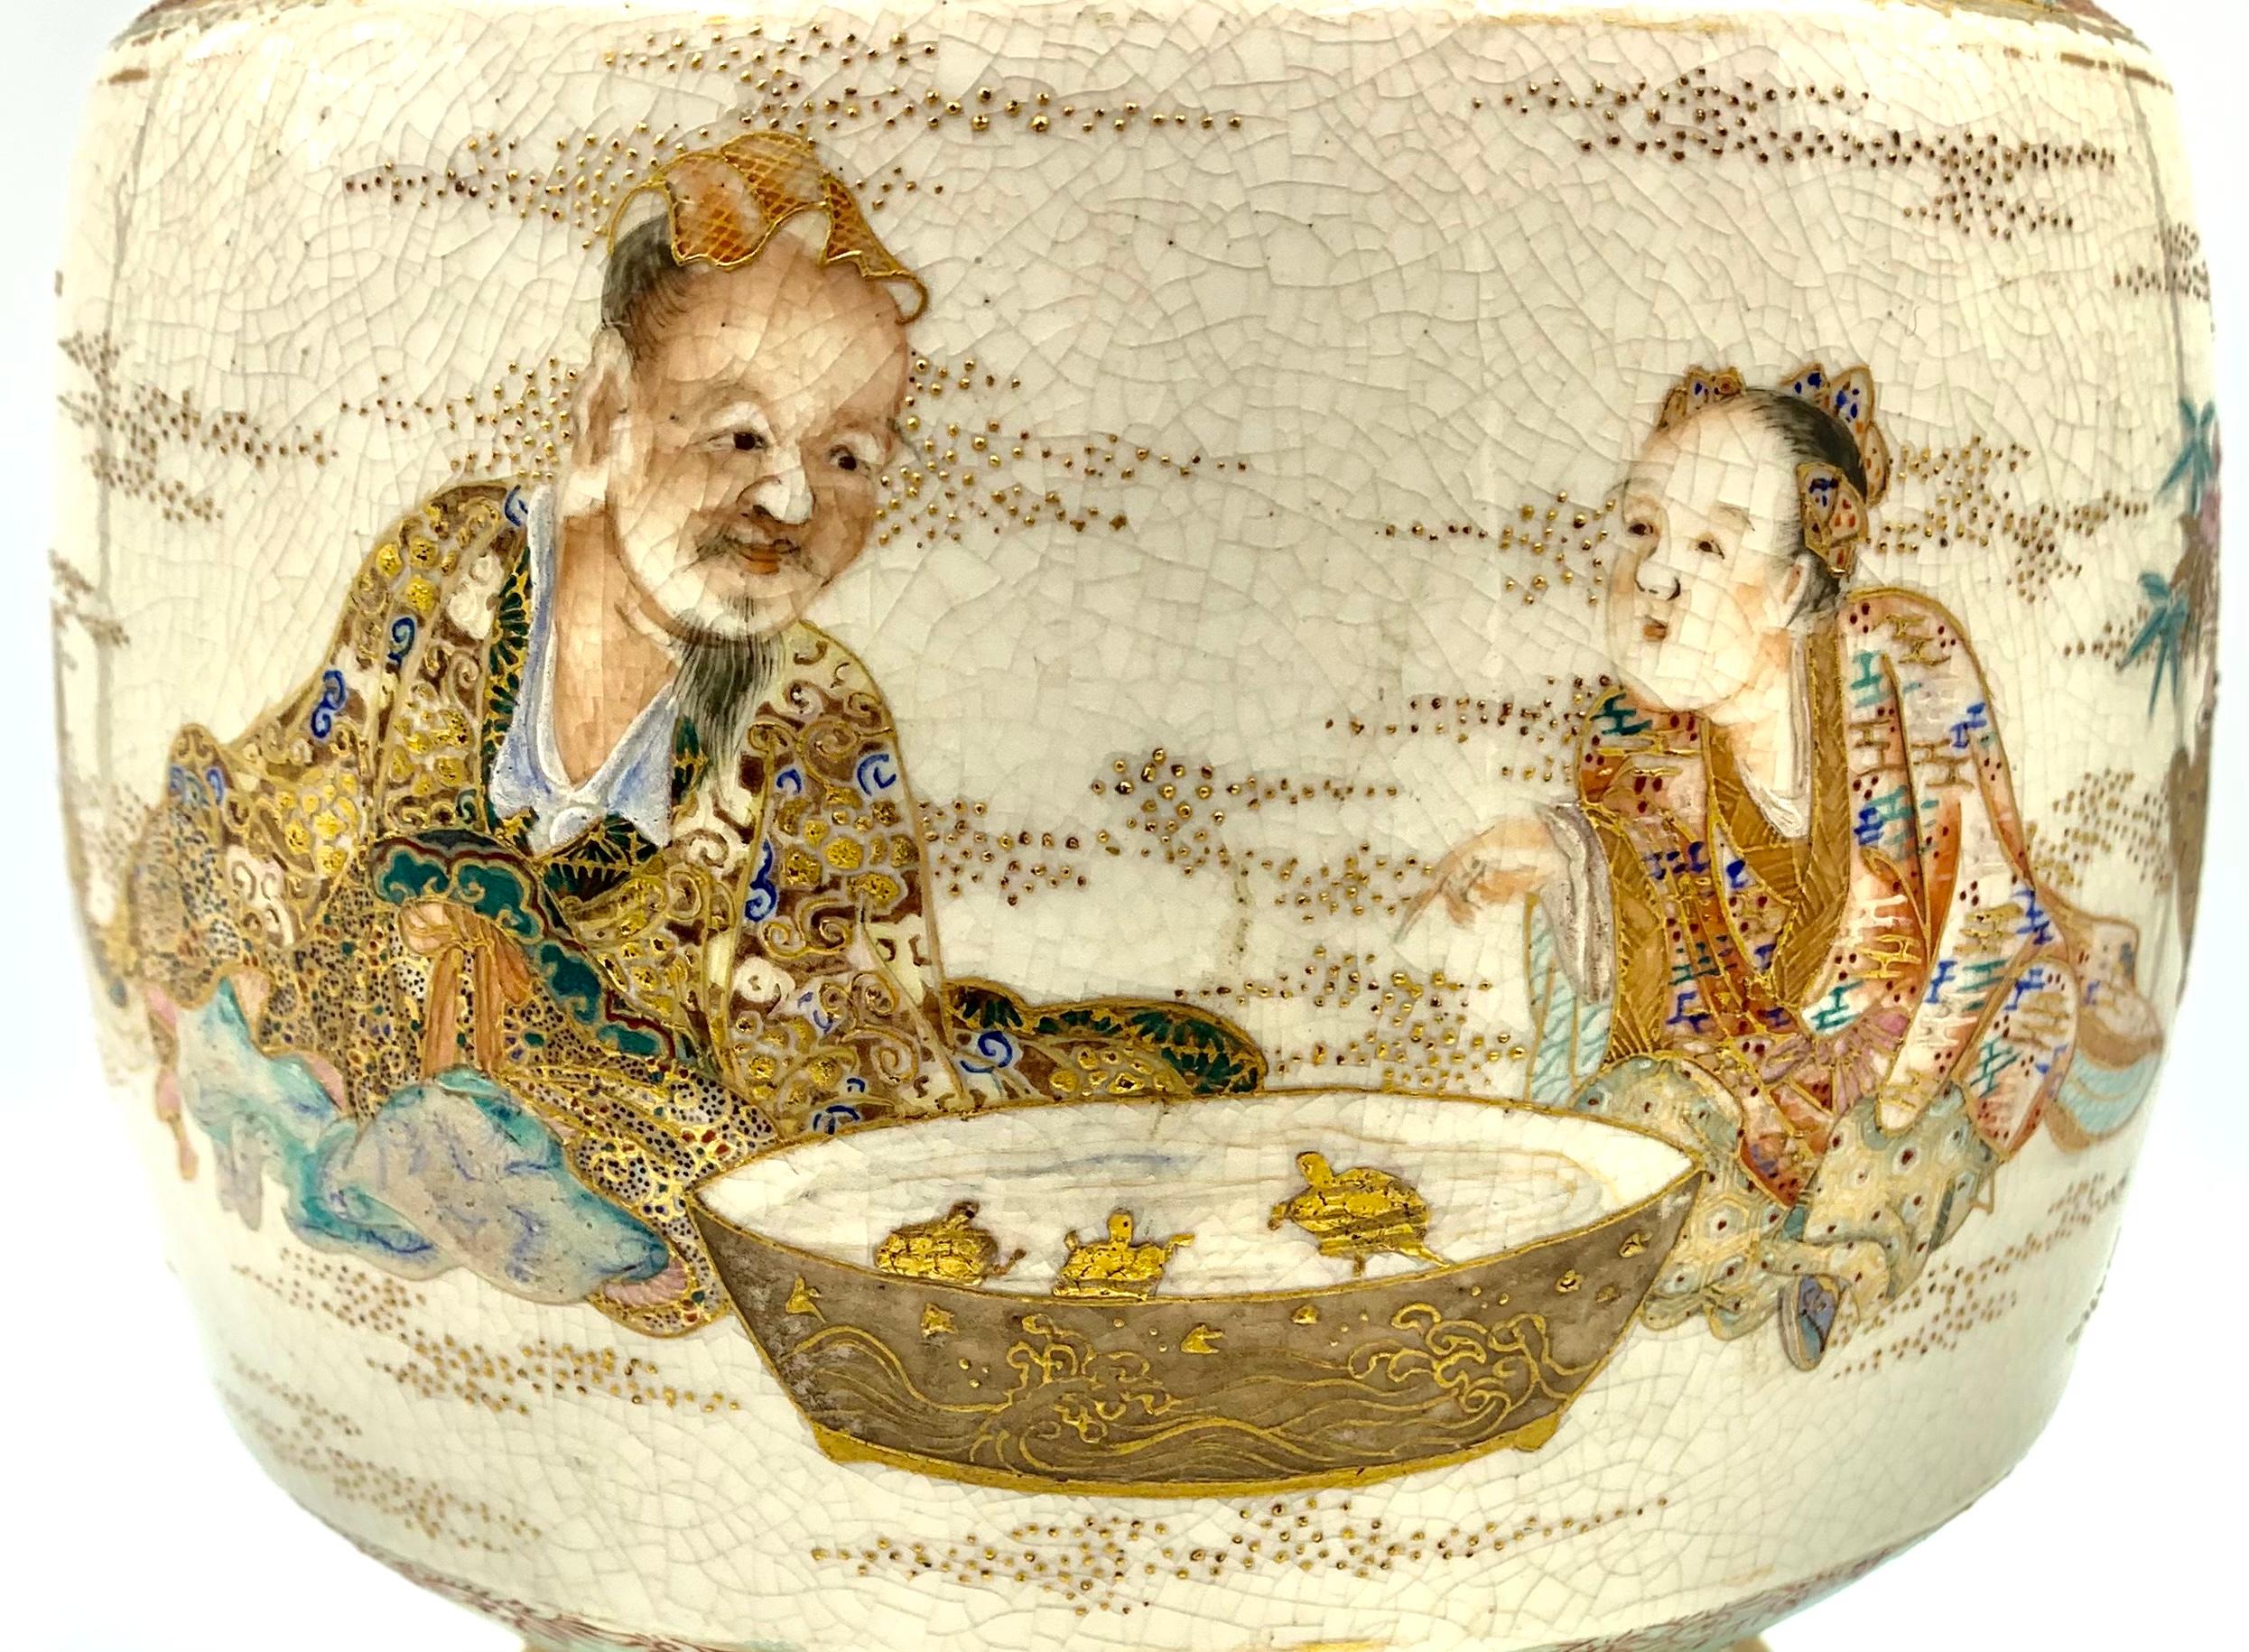 Rare Meiji Period Japanese satsuma vase with superbly painted scenes of a sage and his young companion observing three golden turtles swimming in a large basin on one side, with a reclining sage reading a book next to a young boy reading on the